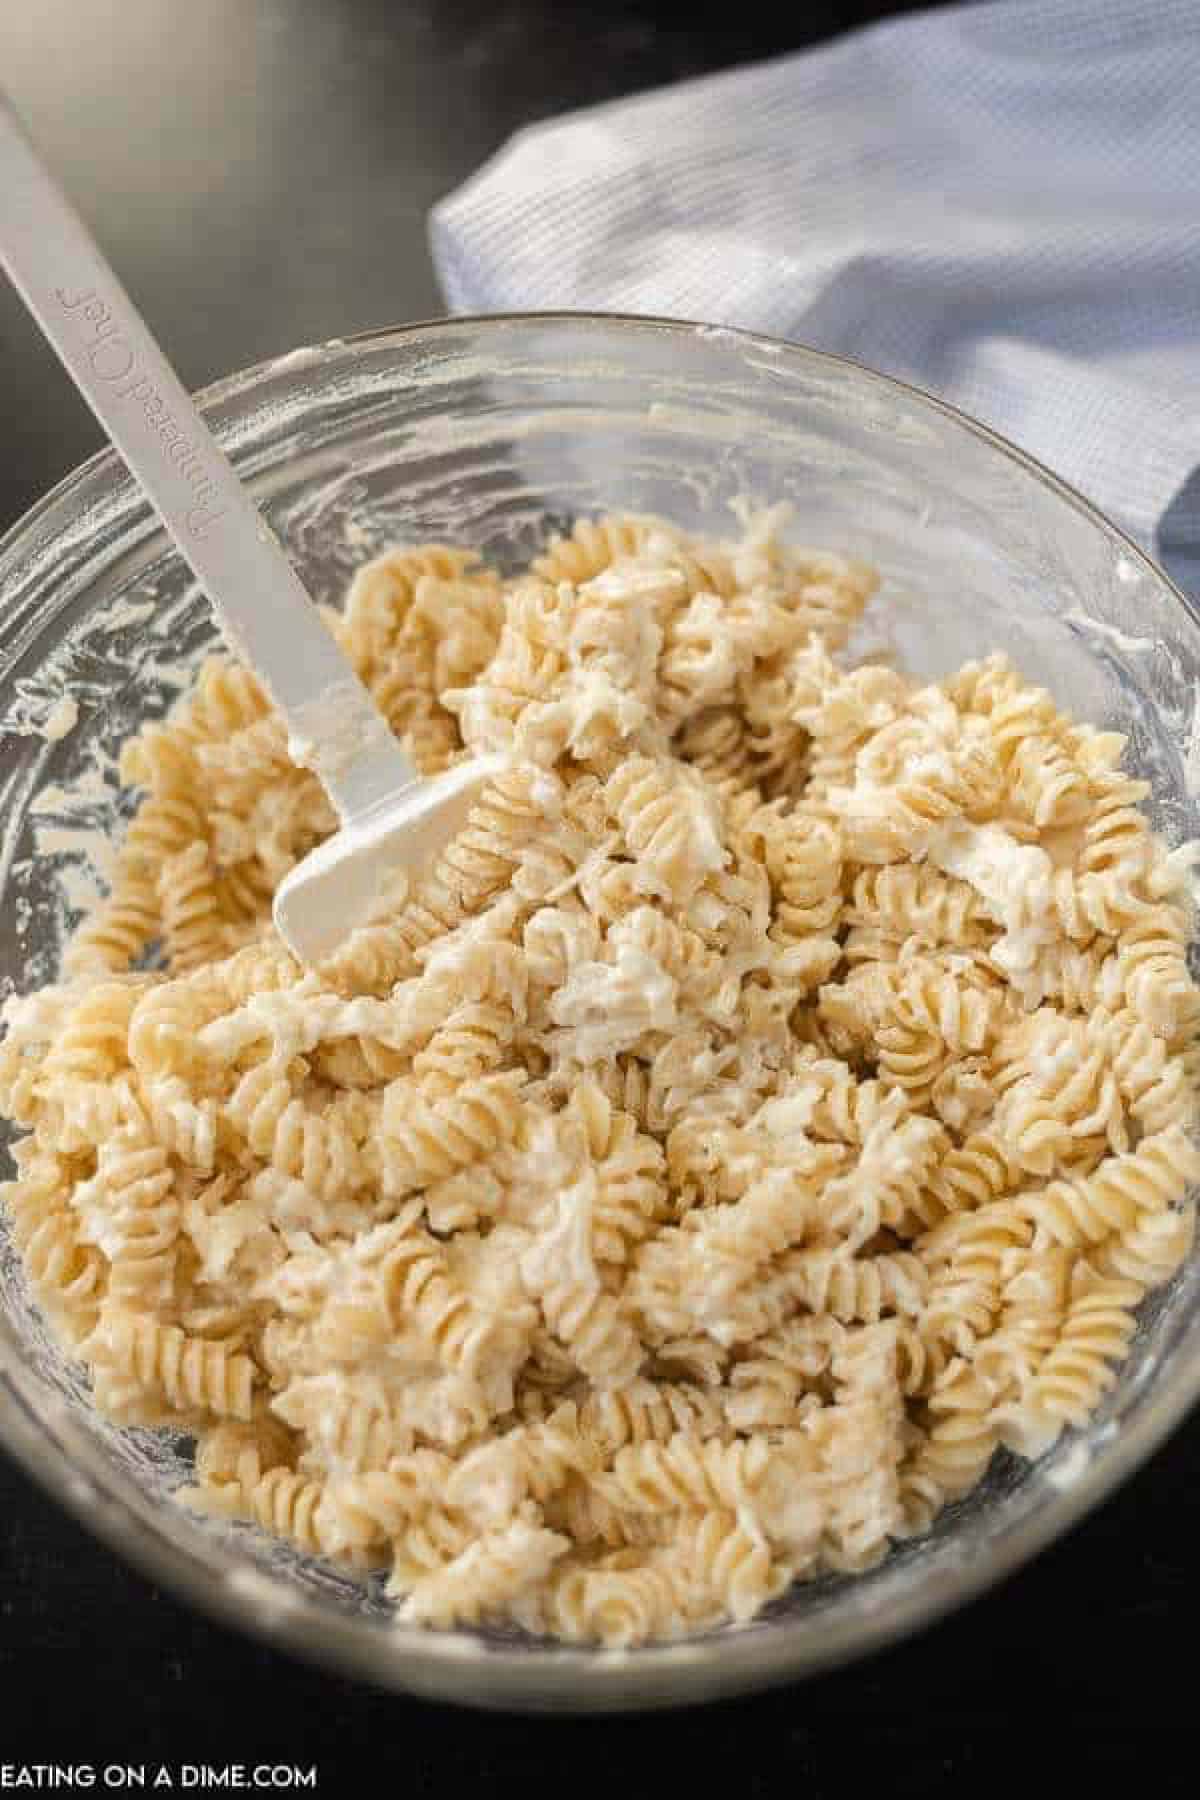 Mixed in cooked rotini pasta in the ricotta cheese mixture in a bowl with a spatula